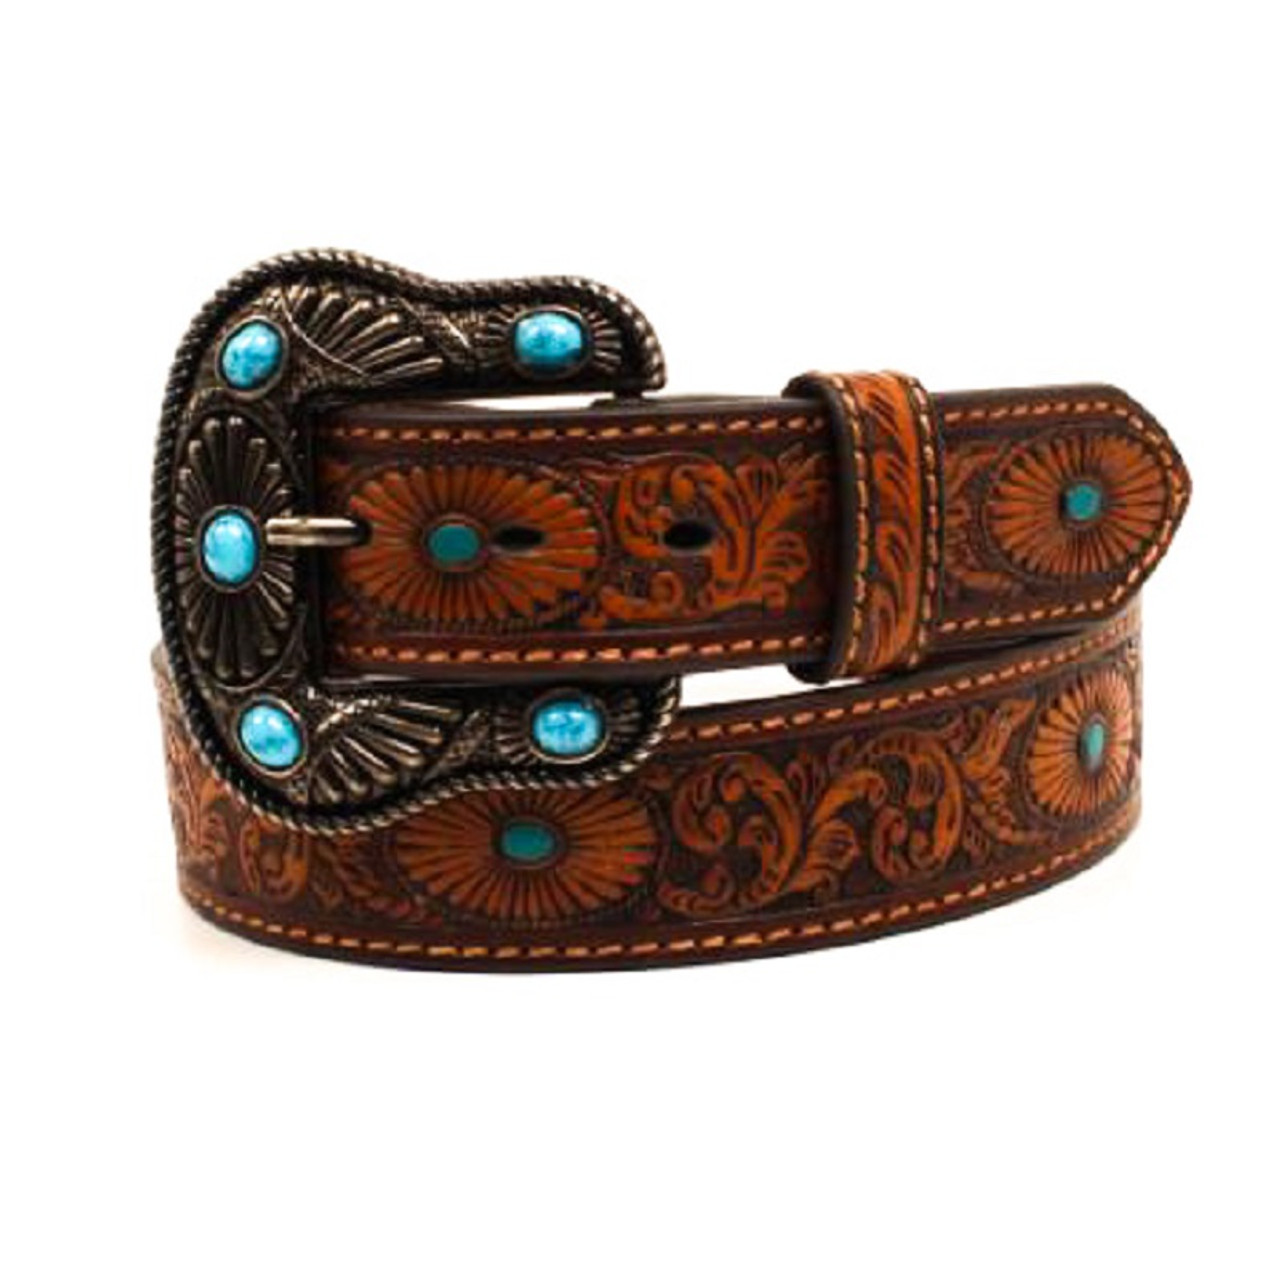 Women's belt decorated with openwork eyelets